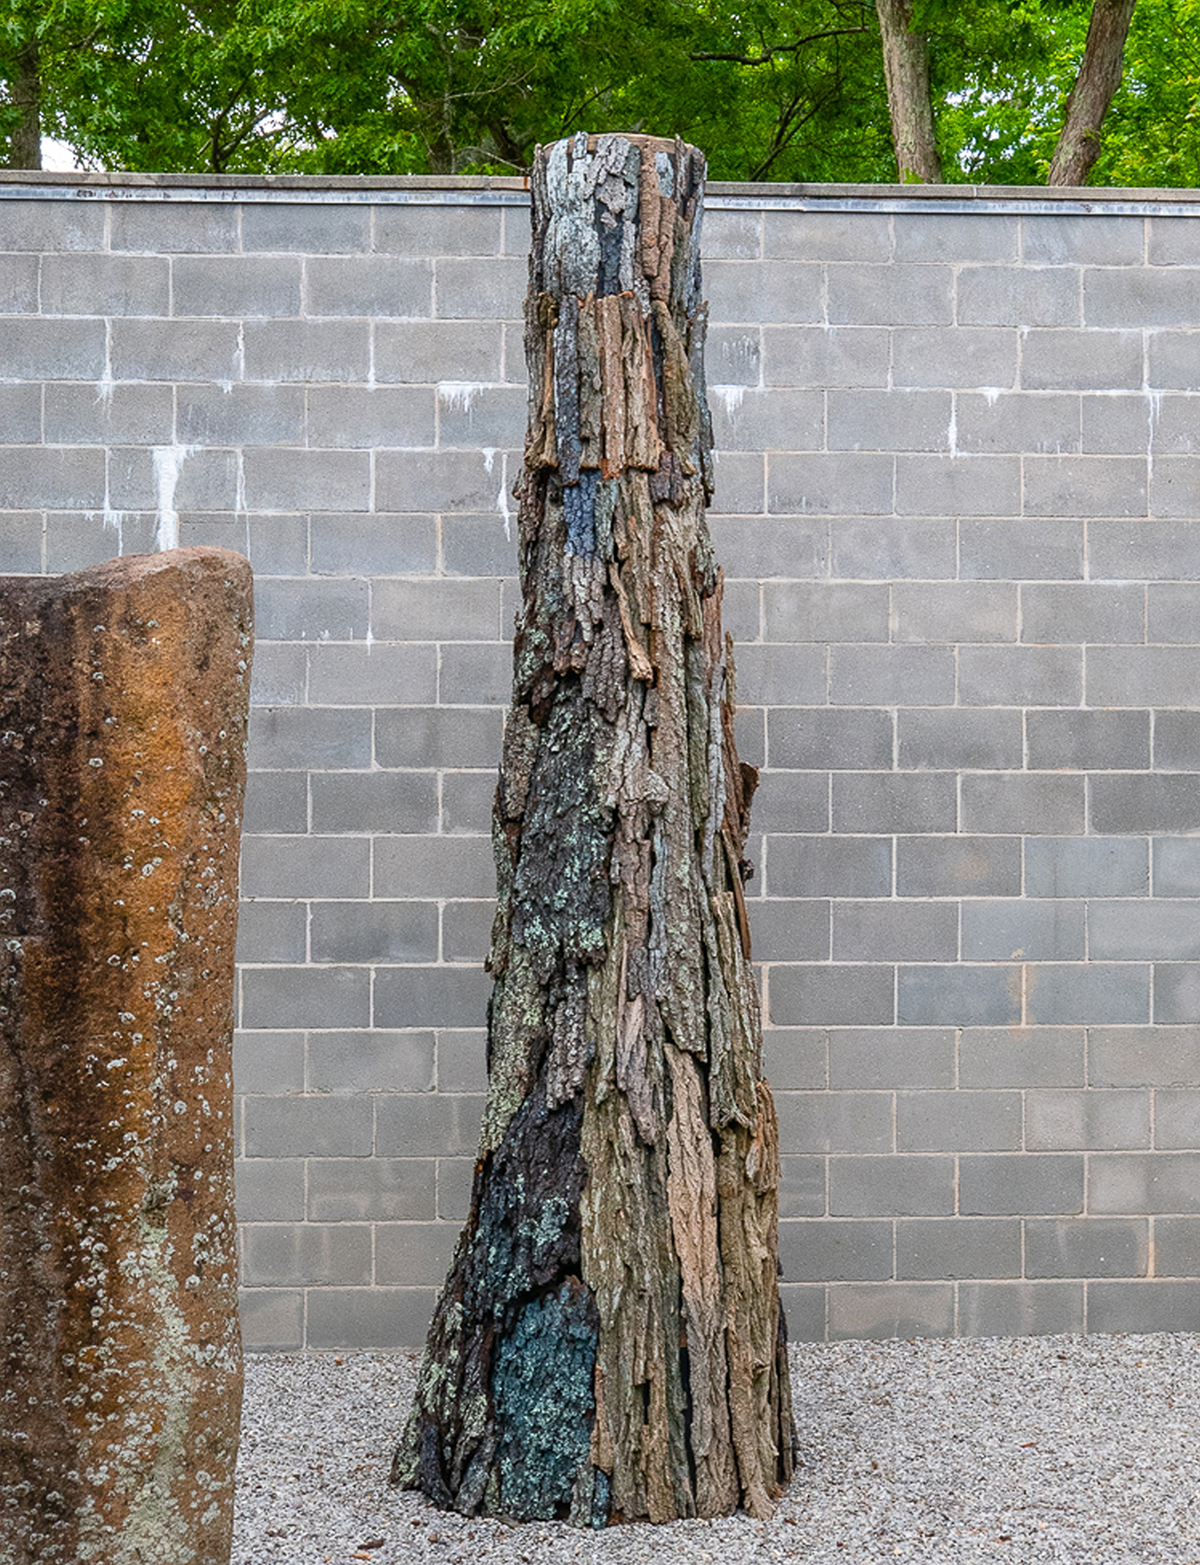 TREE, 2019 a residency and collaboration with Toni Ross and Laurie Lambrecht at Robert Wilson's WATERMILL CENTER, Water Mill, NY